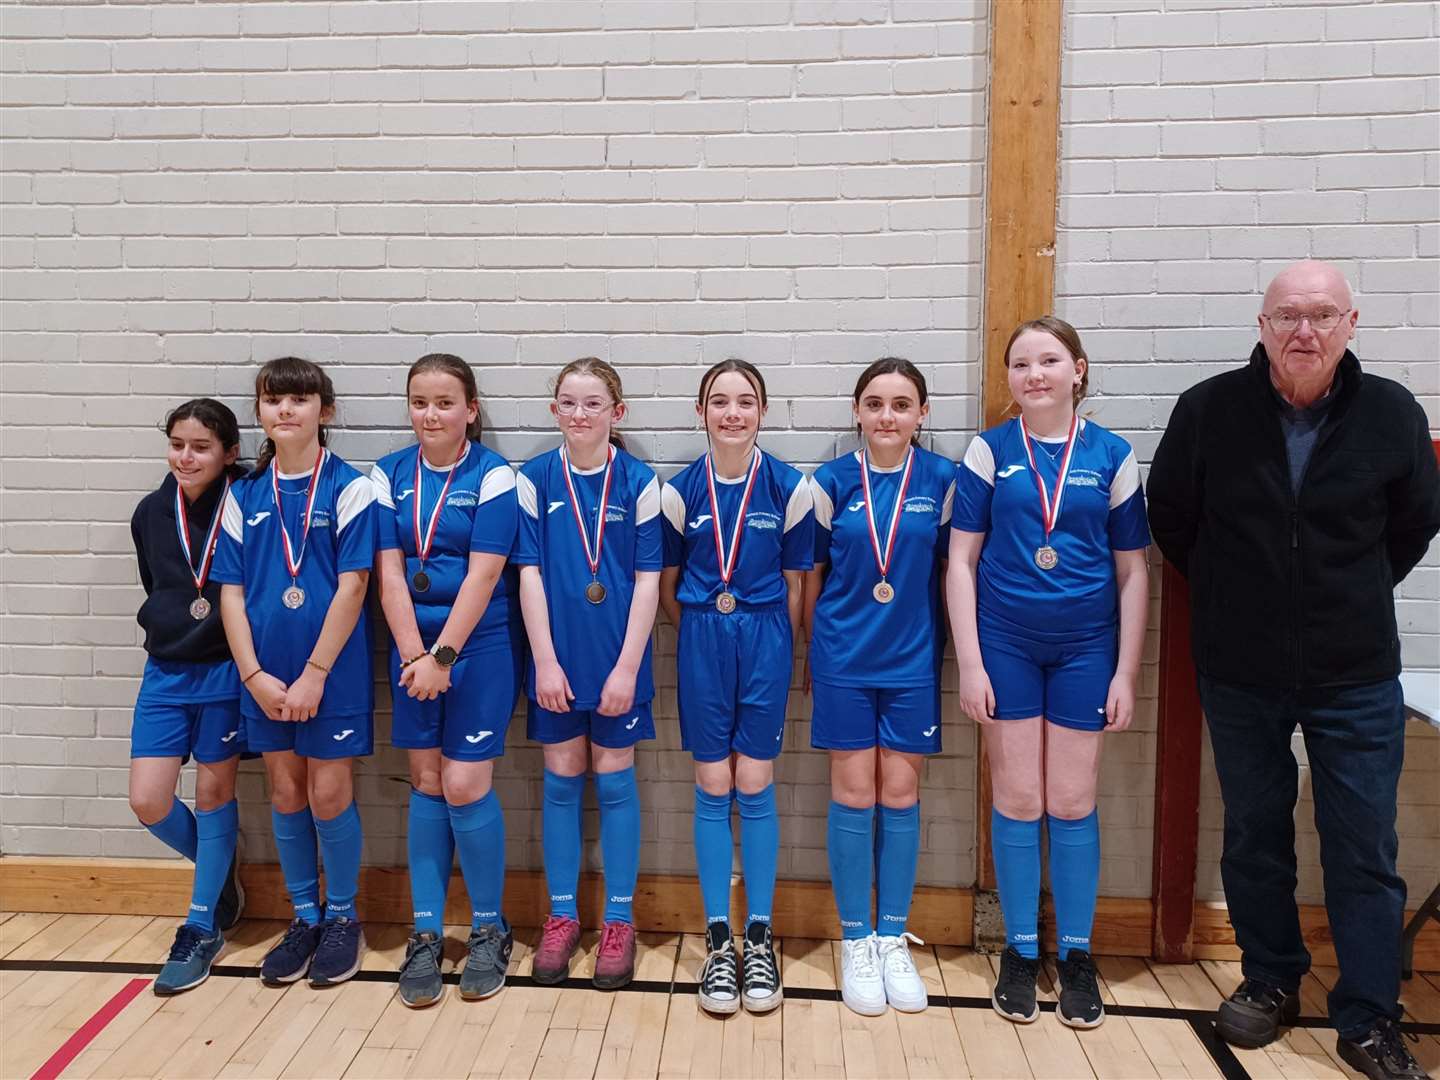 Dornoch Primary School girls' team came second in the Big Schools category.